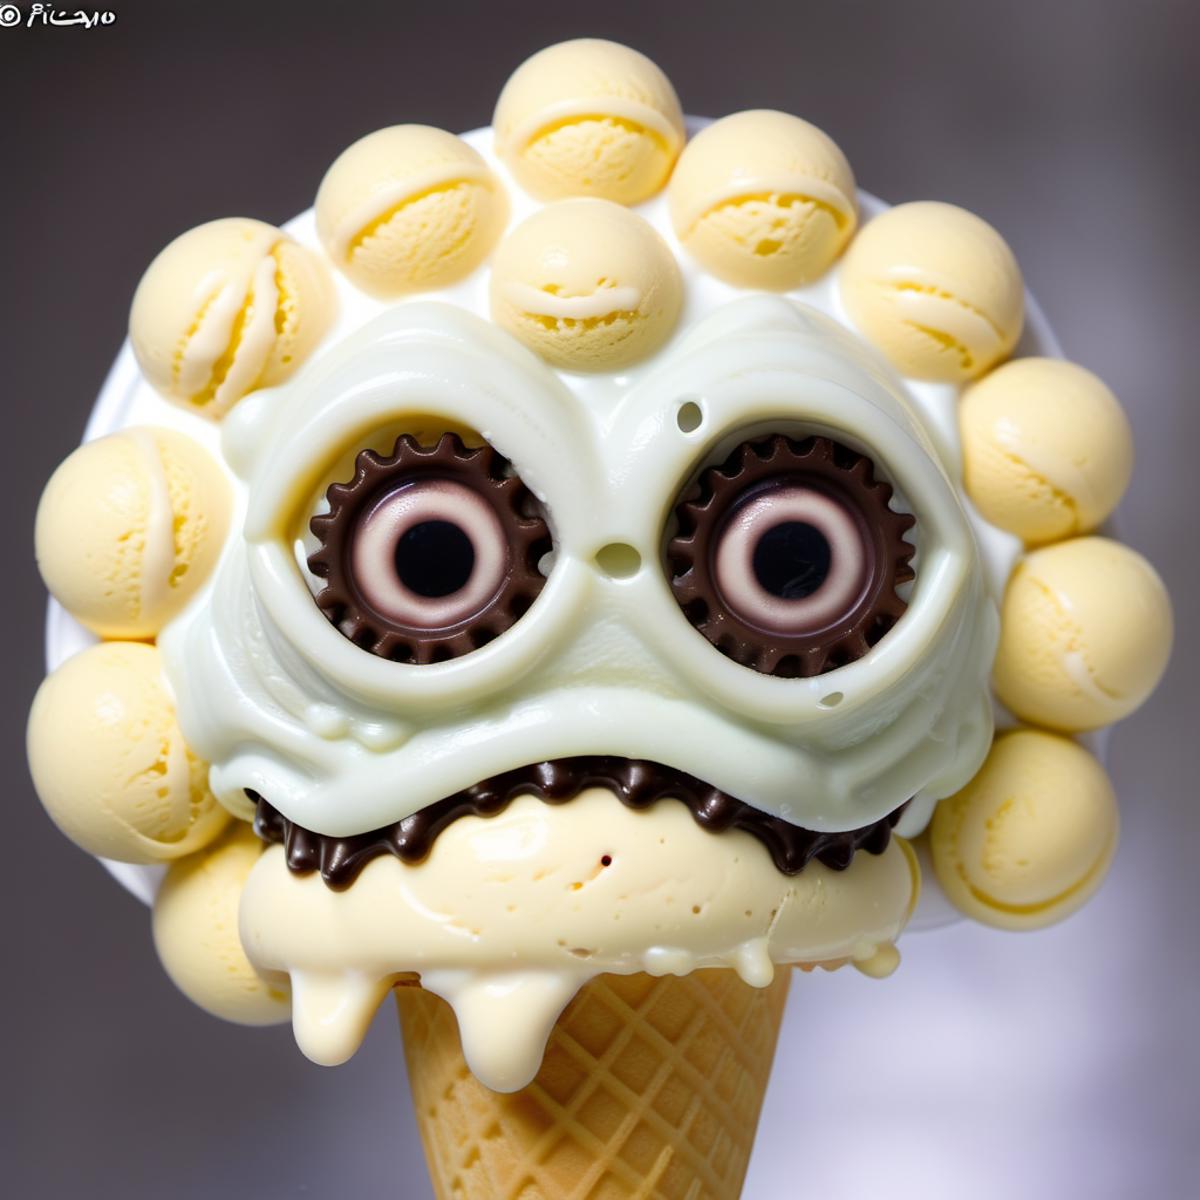 An ice cream cone with a face made of frosting and chocolate bits.